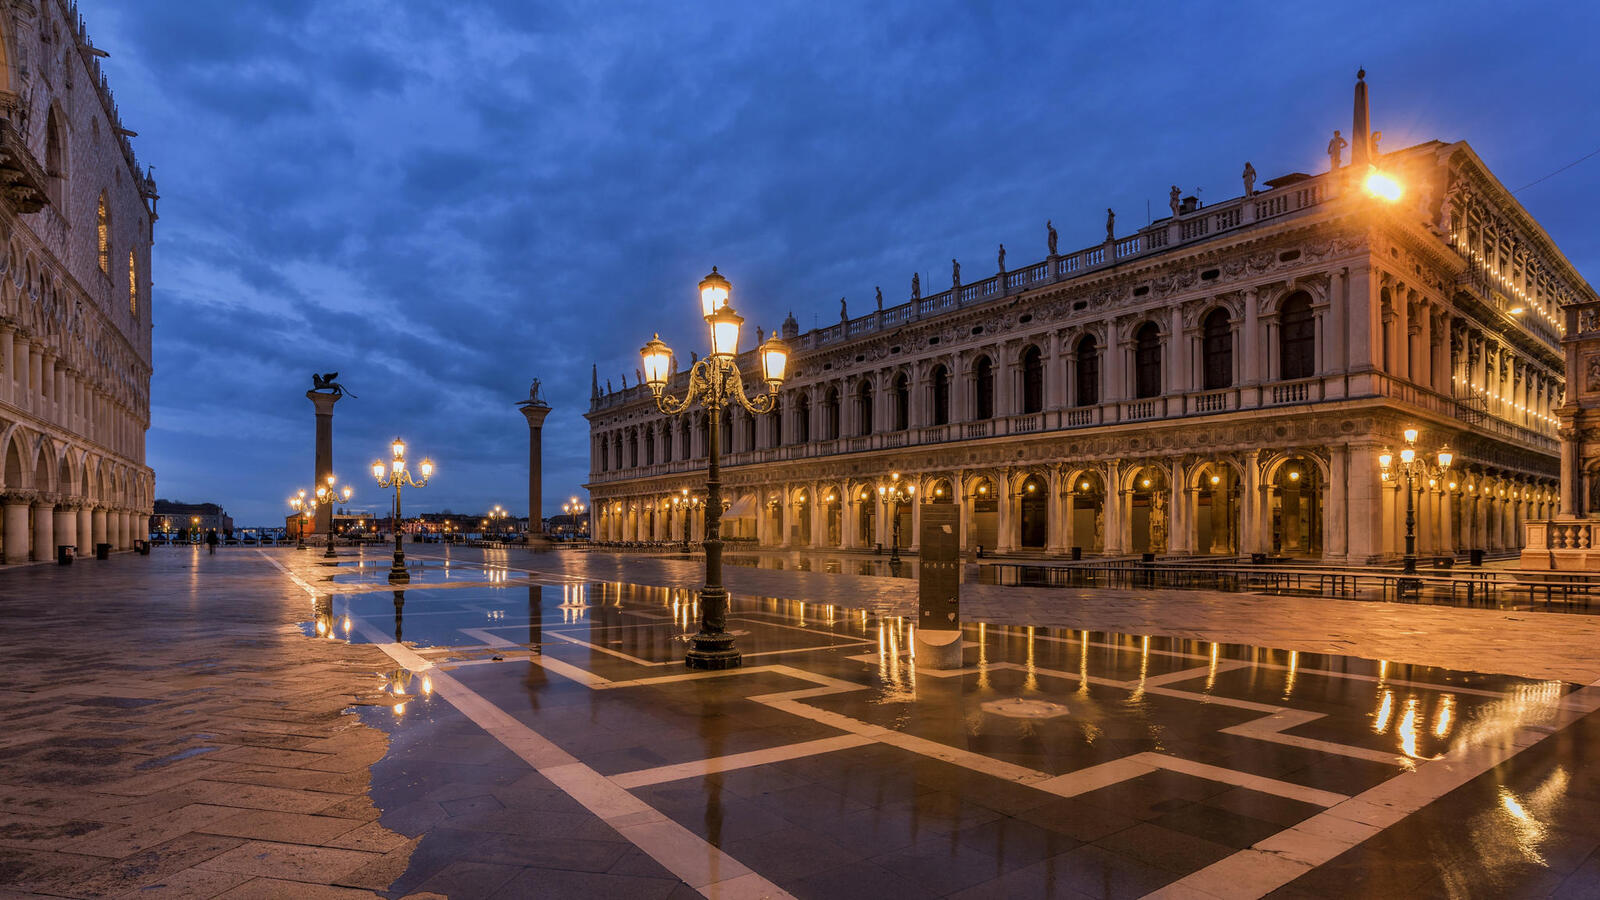 Wallpapers Piazzetta San Marco Venice Italy on the desktop